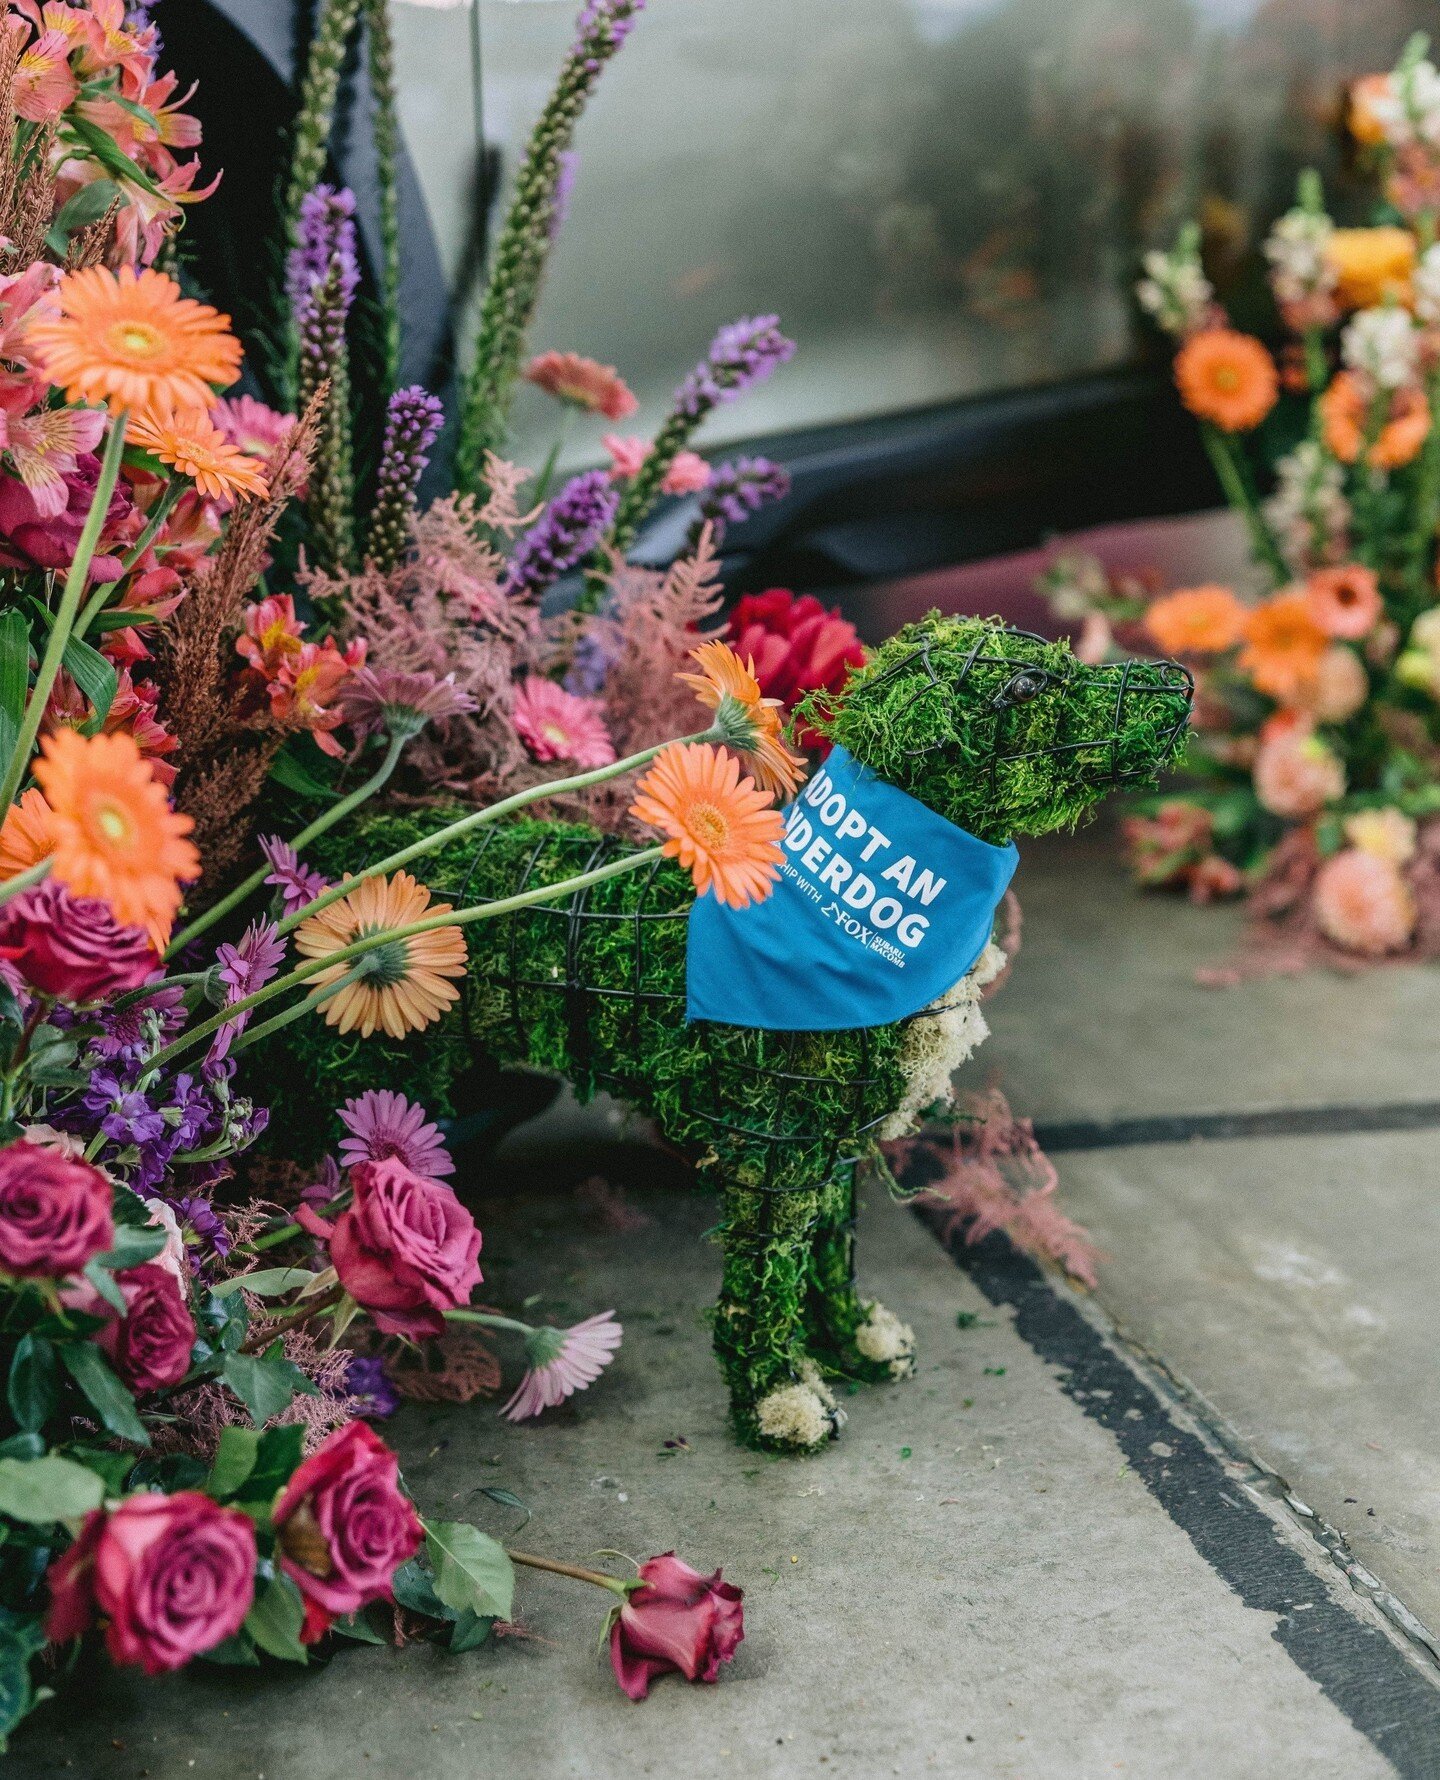 Did we *really* NEED 3 of Historic Eastern Market's sheds for this gala? 100% YES. ⁠
⁠
Guests at the Annual Purrfect Bow Wow Brunch experienced it all -- from mingling with cocktails to floral installations to visiting with furry friends. The best pa